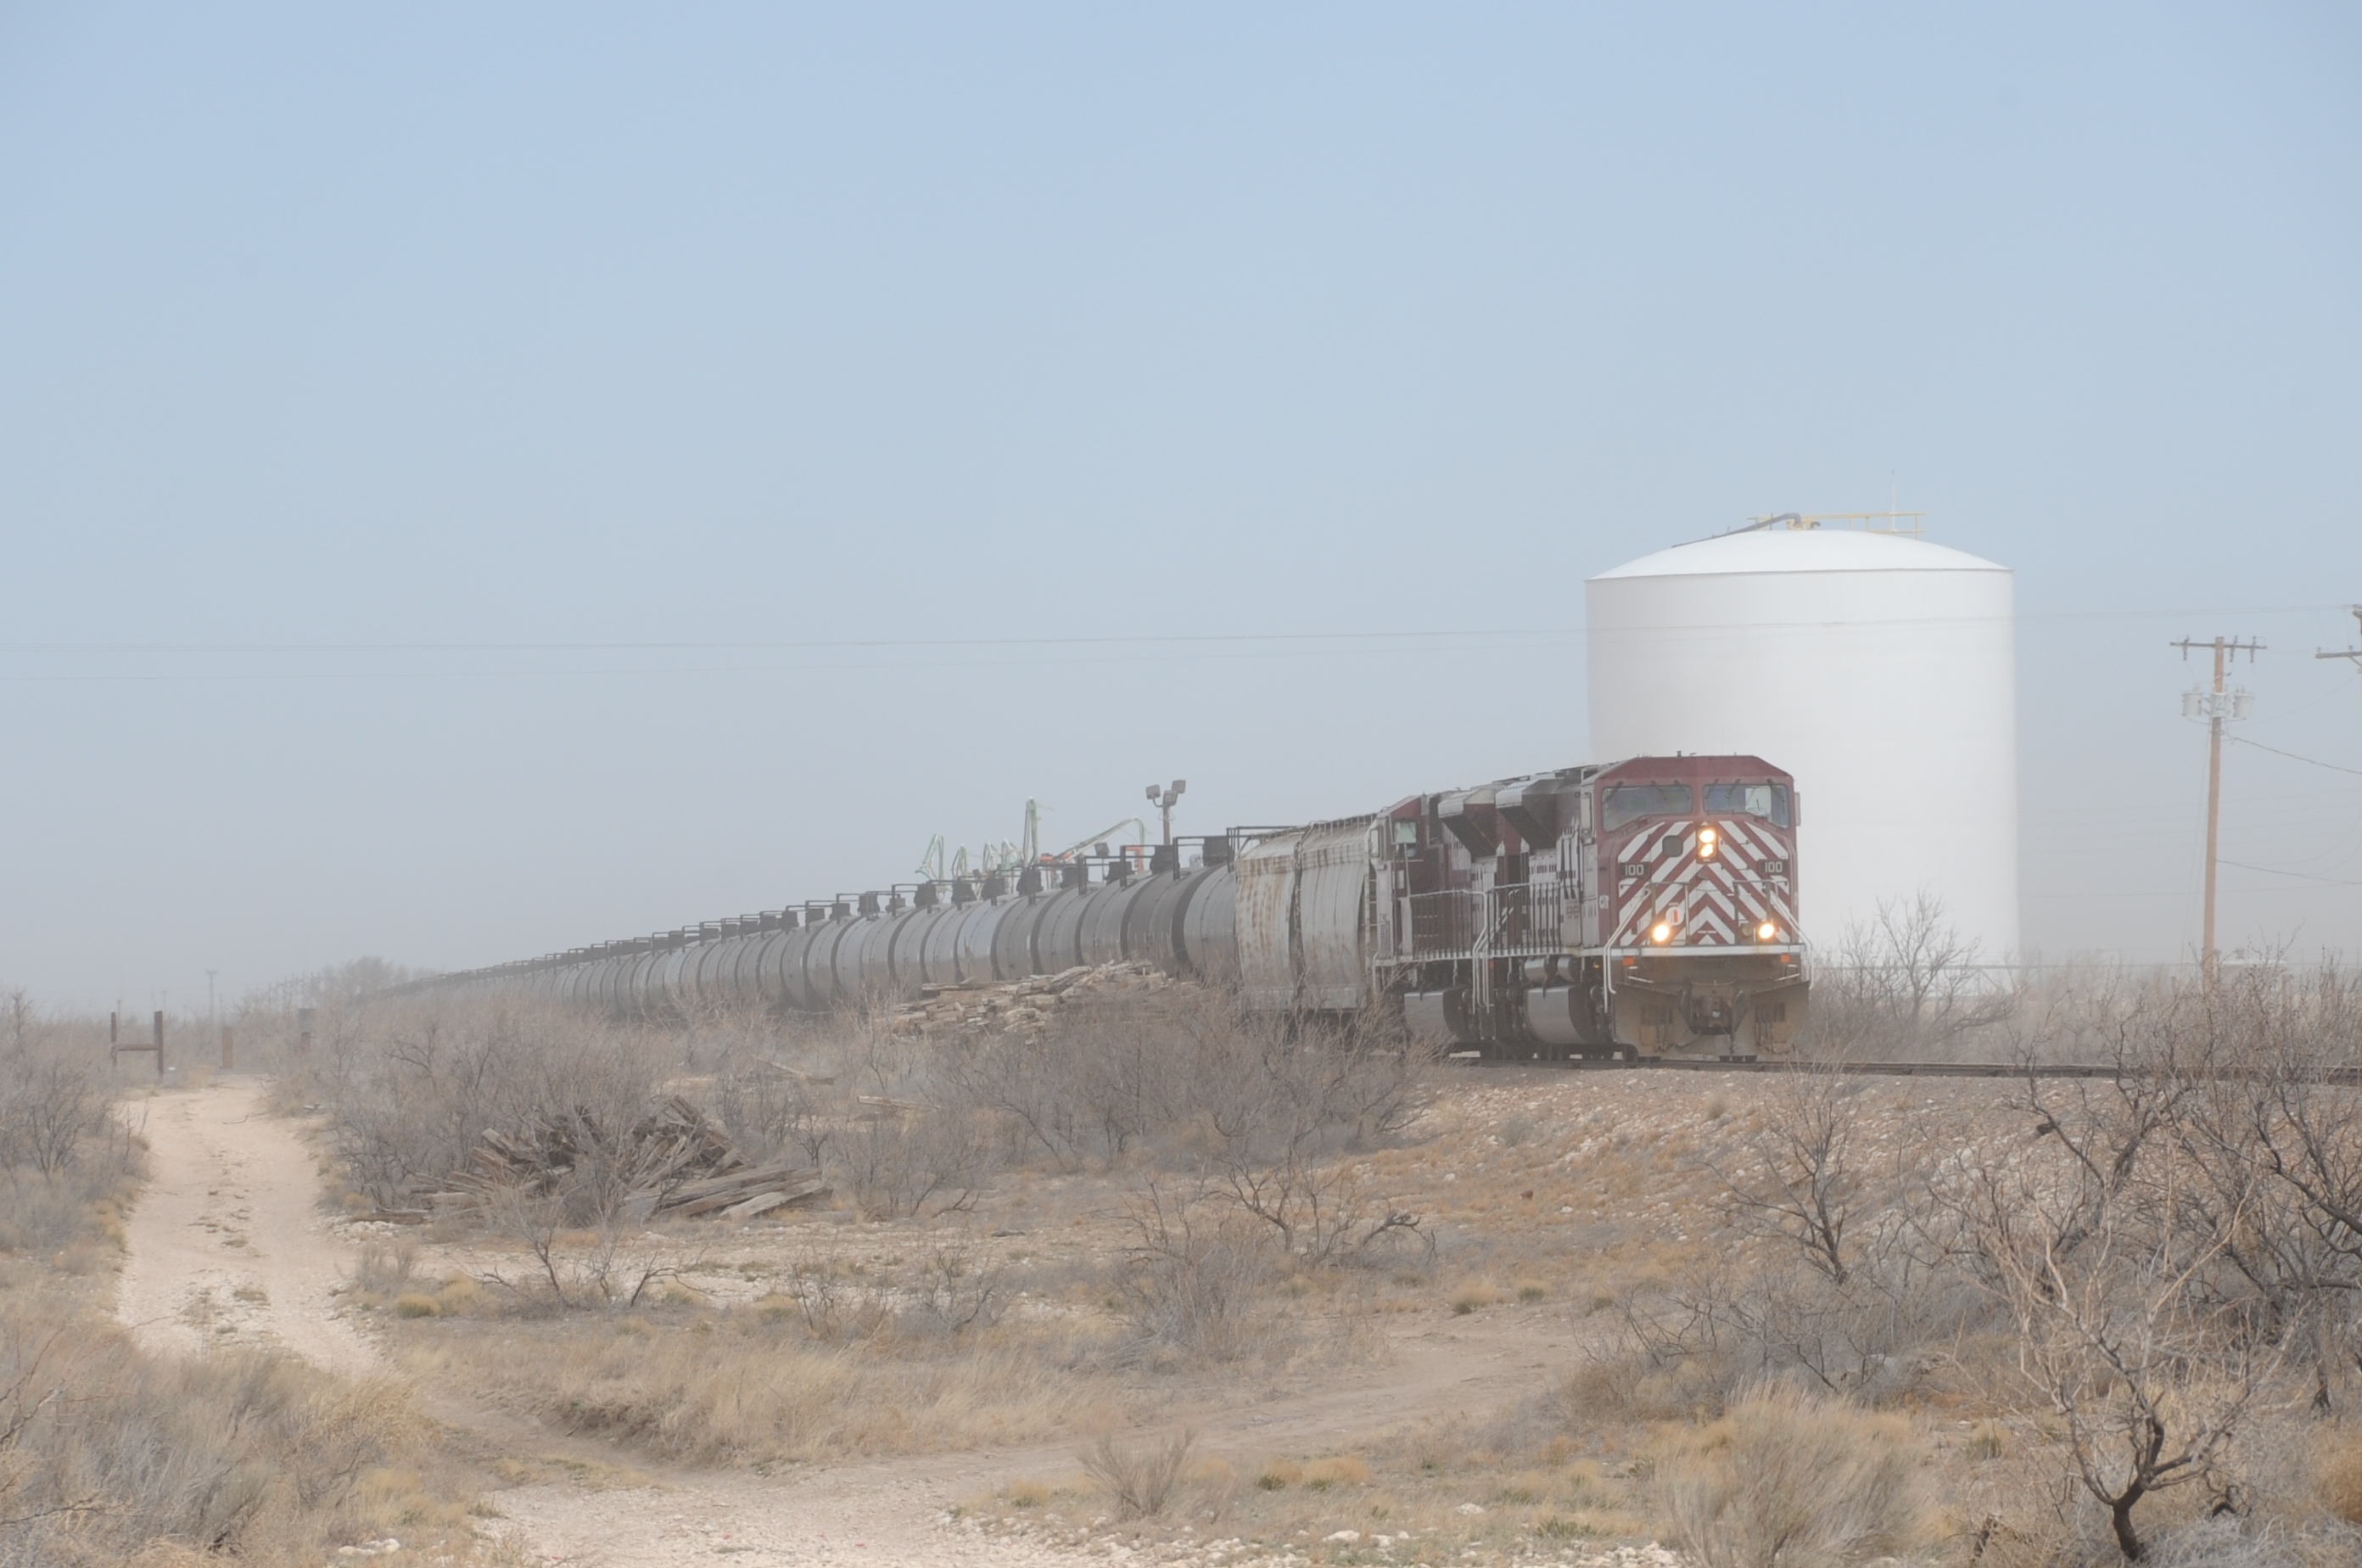 2013. Texas - New Mexico Railroad. A 79-car crude oil unit train moves south near Hobbs, NM, heading for the UP interchange at Monahans, Texas. Yes, that's blowing dirt enshrouding the train.